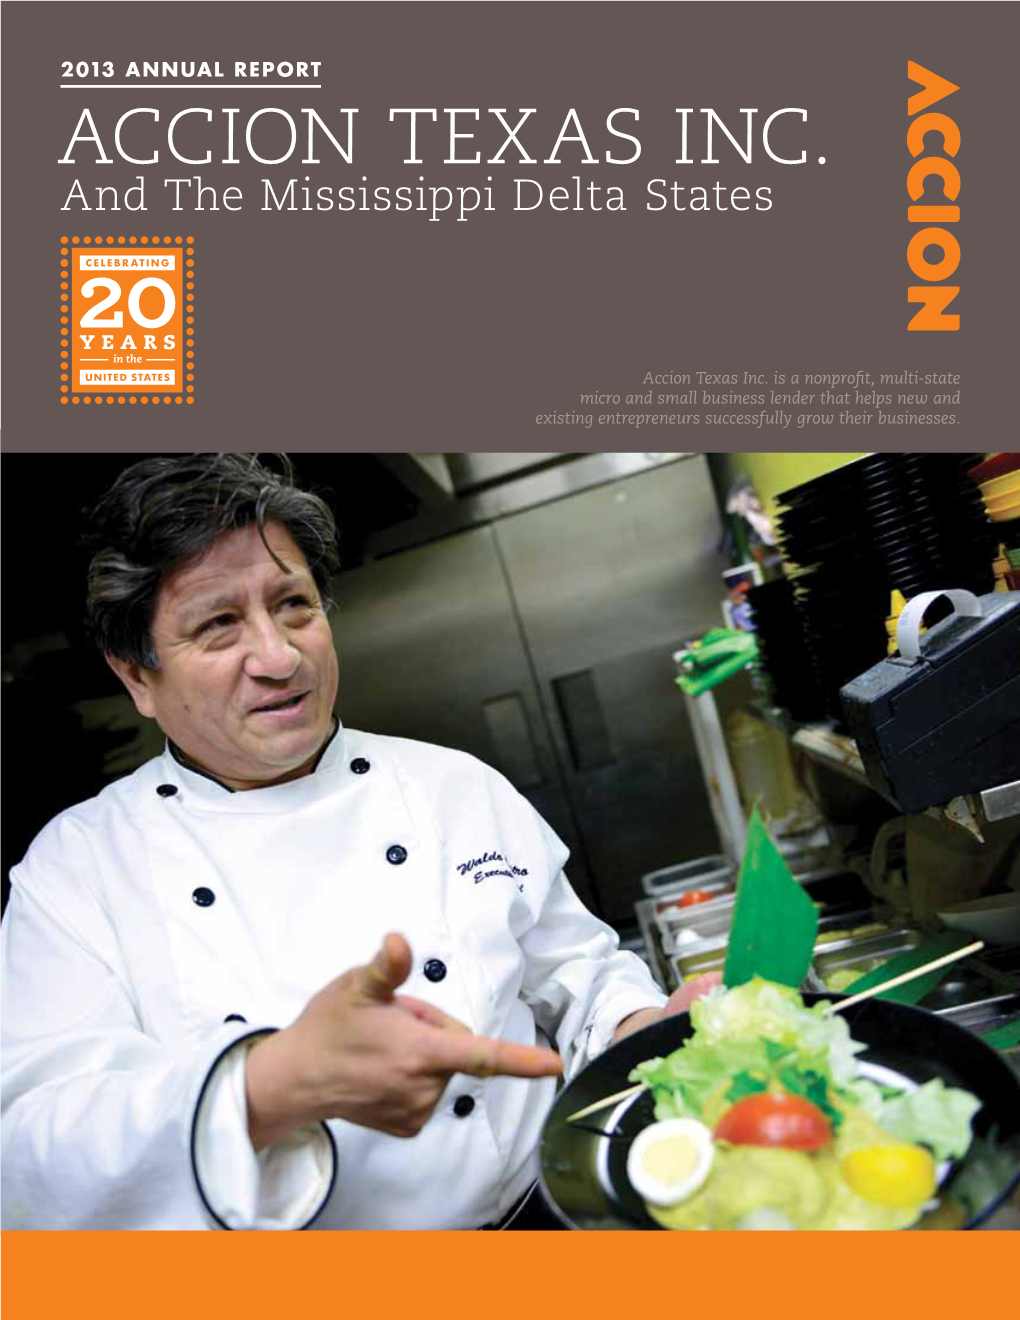 ACCION TEXAS INC. and the Mississippi Delta States